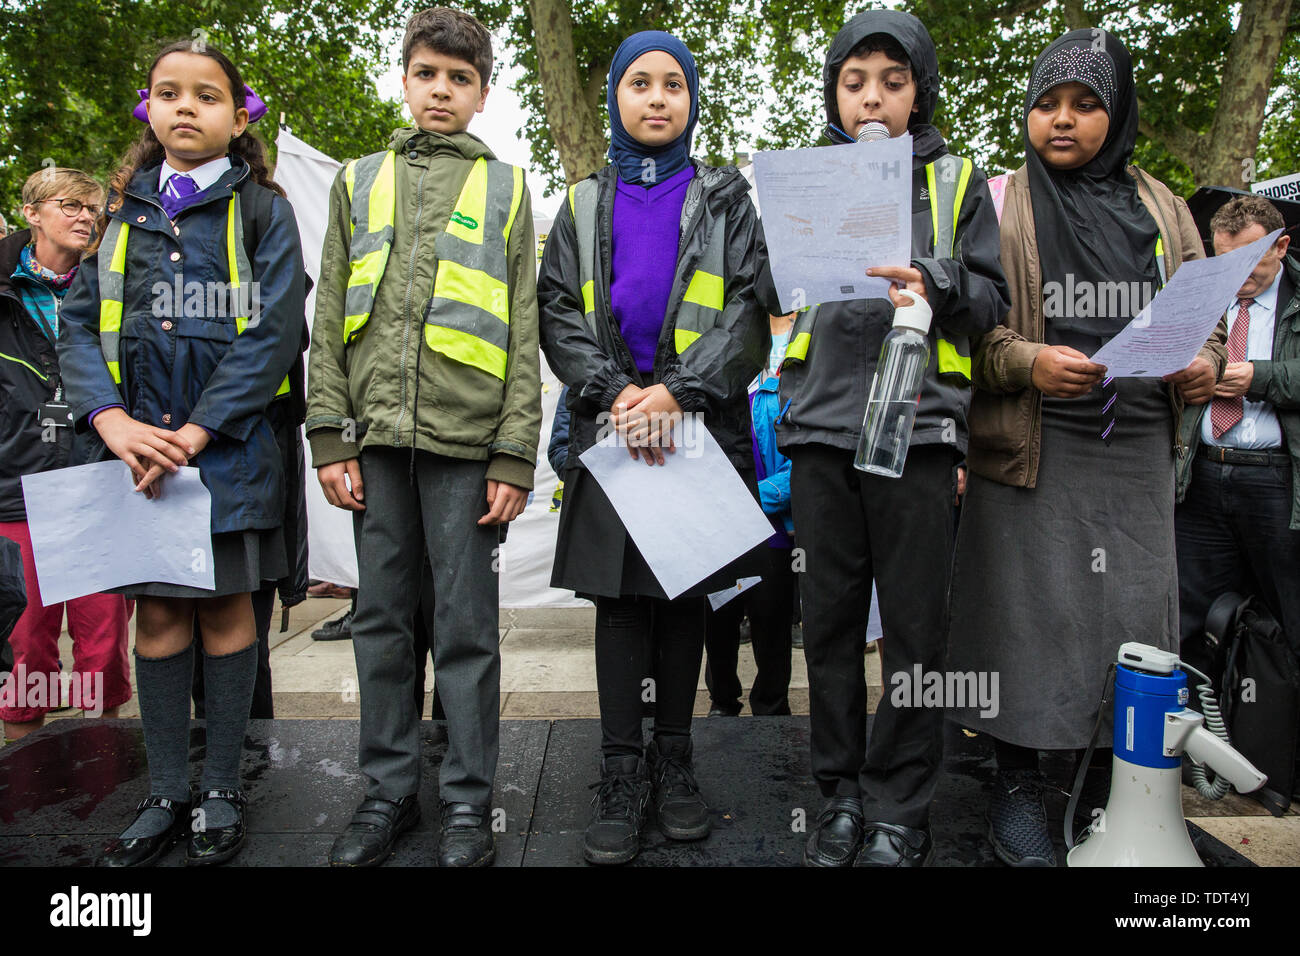 London, UK. 18 June, 2019. Children from the Hugh Myddelton Primary School Refugee Committee address a demonstration in Parliament Square to demand that the Government resettle 10,000 children over 10 years. As part of Lord Dubs’ ‘Our Turn’ campaign, councils around the UK have already pledged places for over 1,100 children if the Government should make a new resettlement commitment.  Credit: Mark Kerrison/Alamy Live News Stock Photo